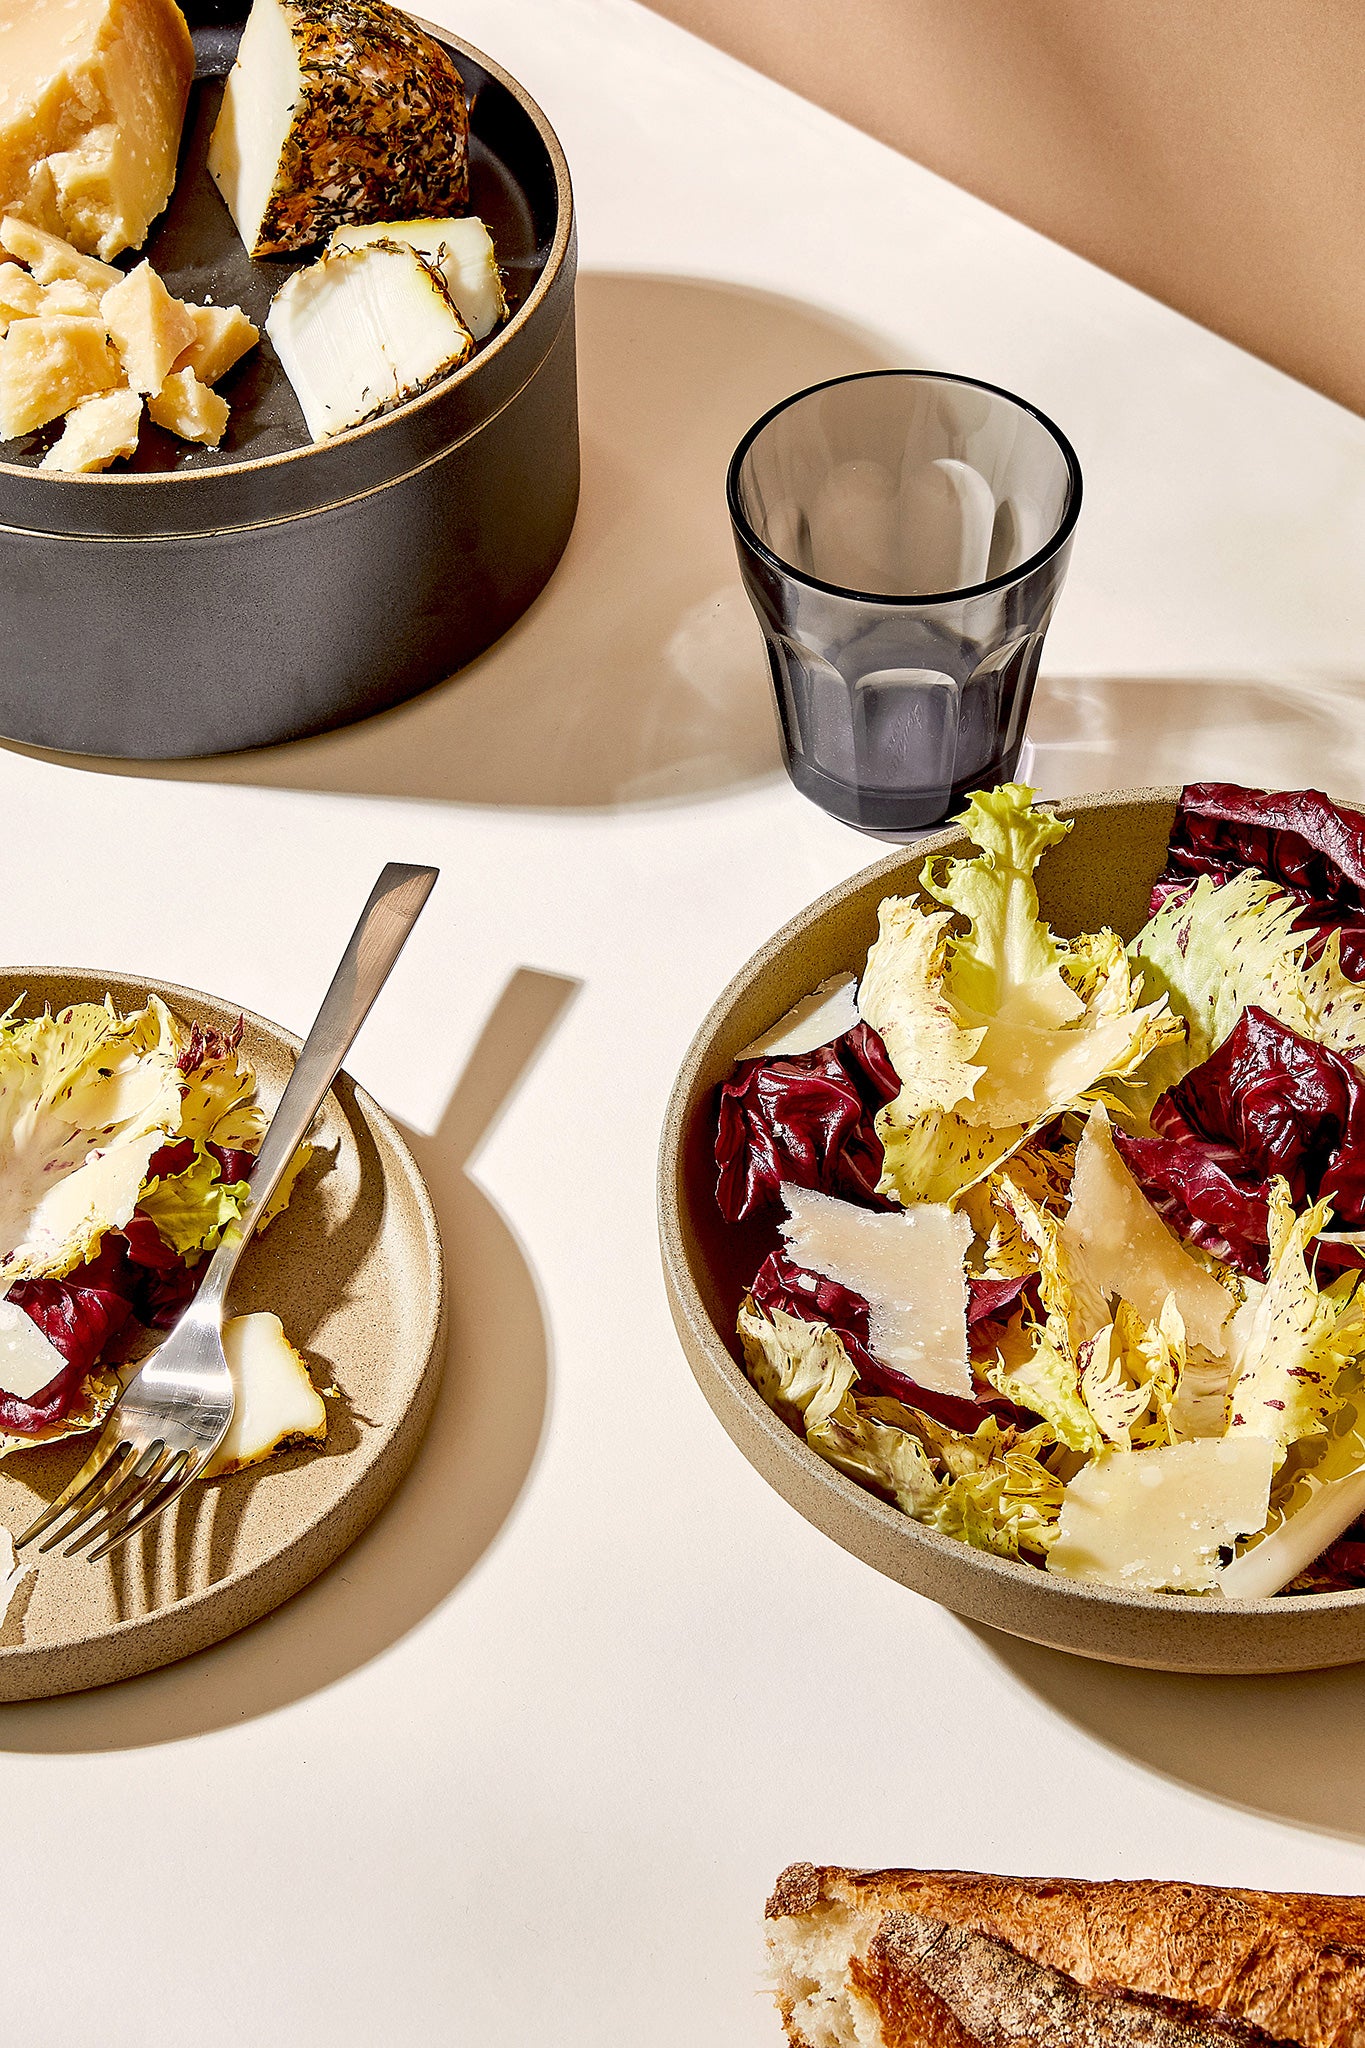 Salad, cheese, and bread in Hasami Porcelain plates and bowls on a table